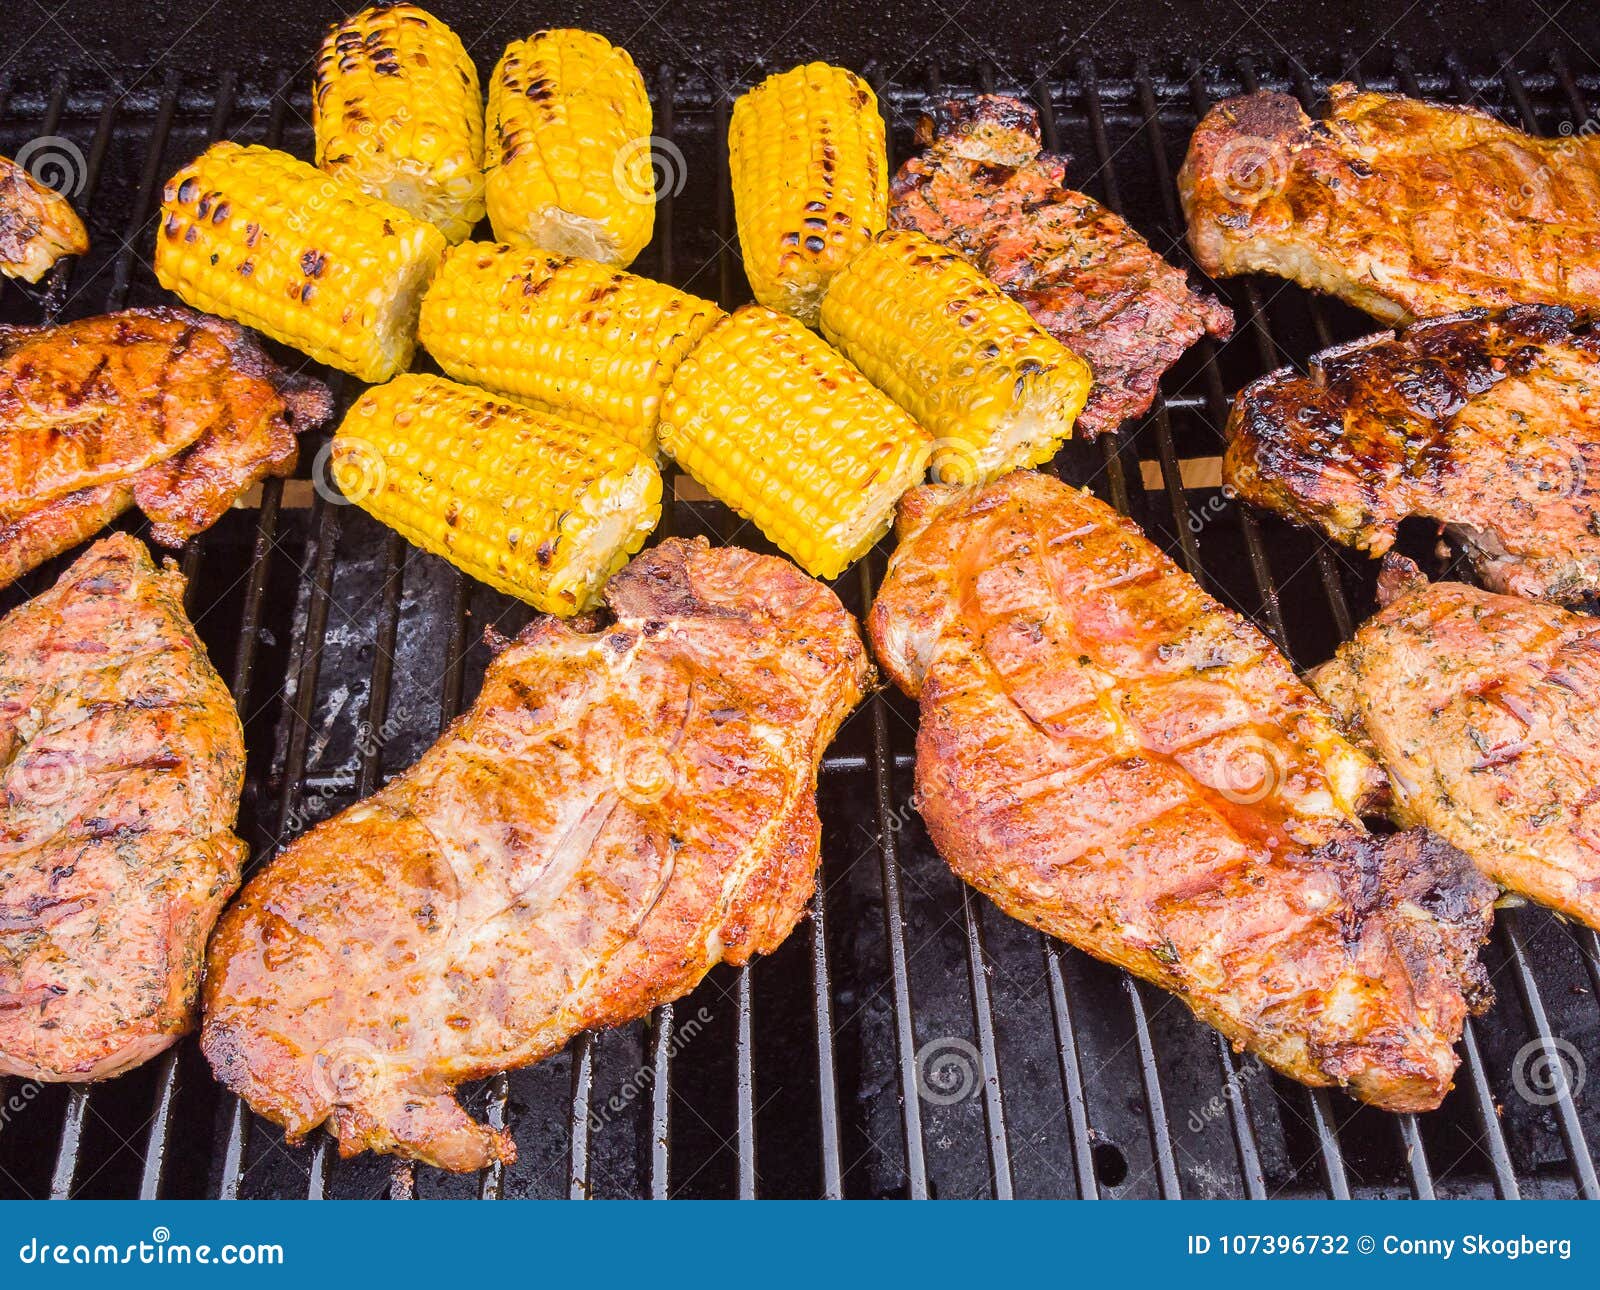 A Gas Barbeque Grill With Meat On Stock Photo Image Of Barbecued Camping 107396732